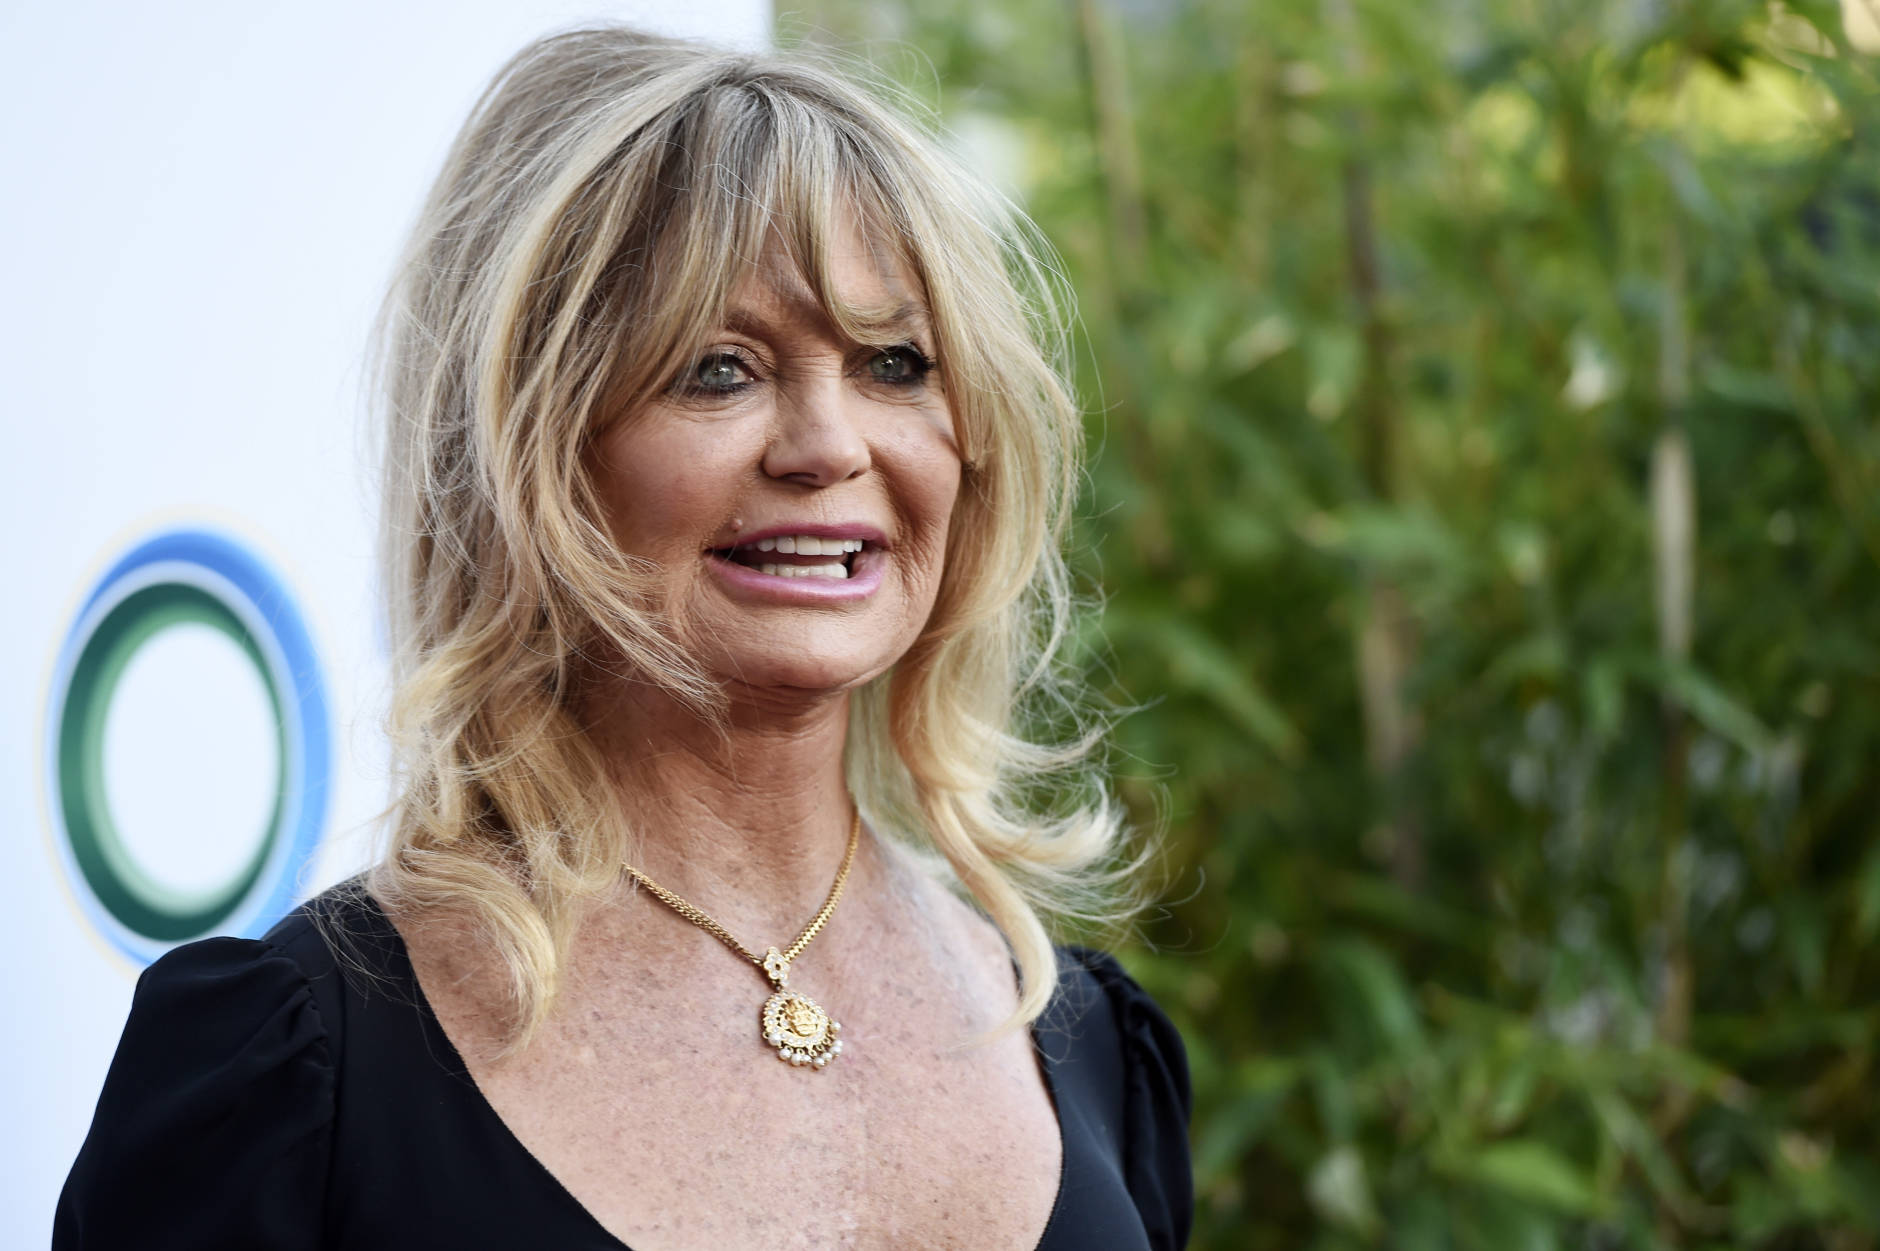 Actress Goldie Hawn poses at "The Champions of Our Planet's Future" annual gala on Thursday, March 24, 2016, in Beverly Hills, Calif. (Photo by Chris Pizzello/Invision/AP)